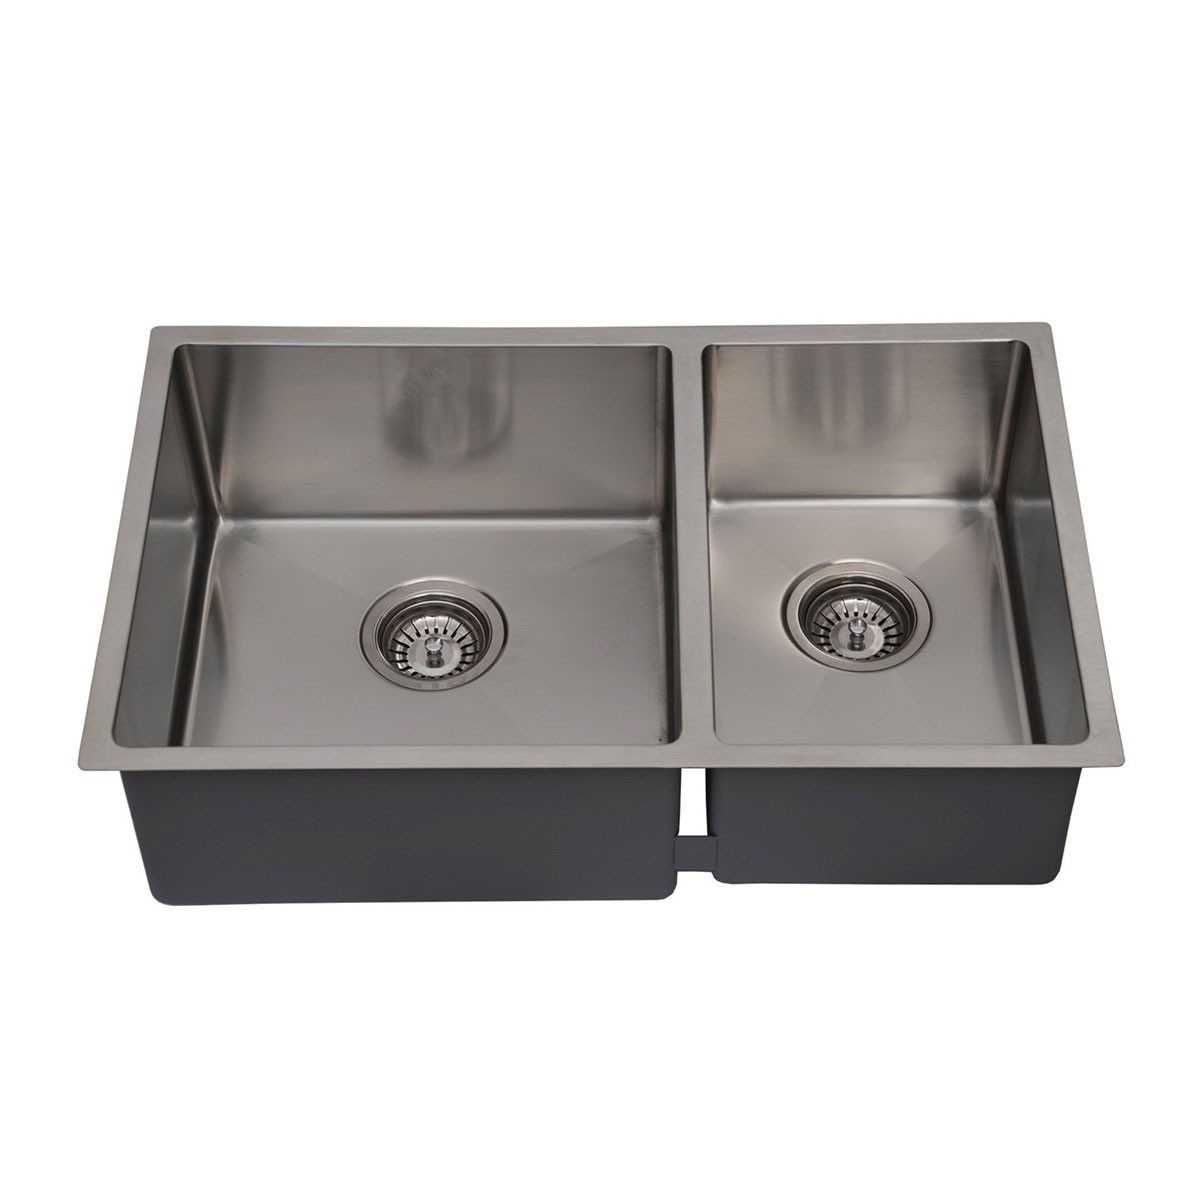 32 x 19 In. Stainless Steel Kitchen Sink, Double Bowl (DDR3219-R10)